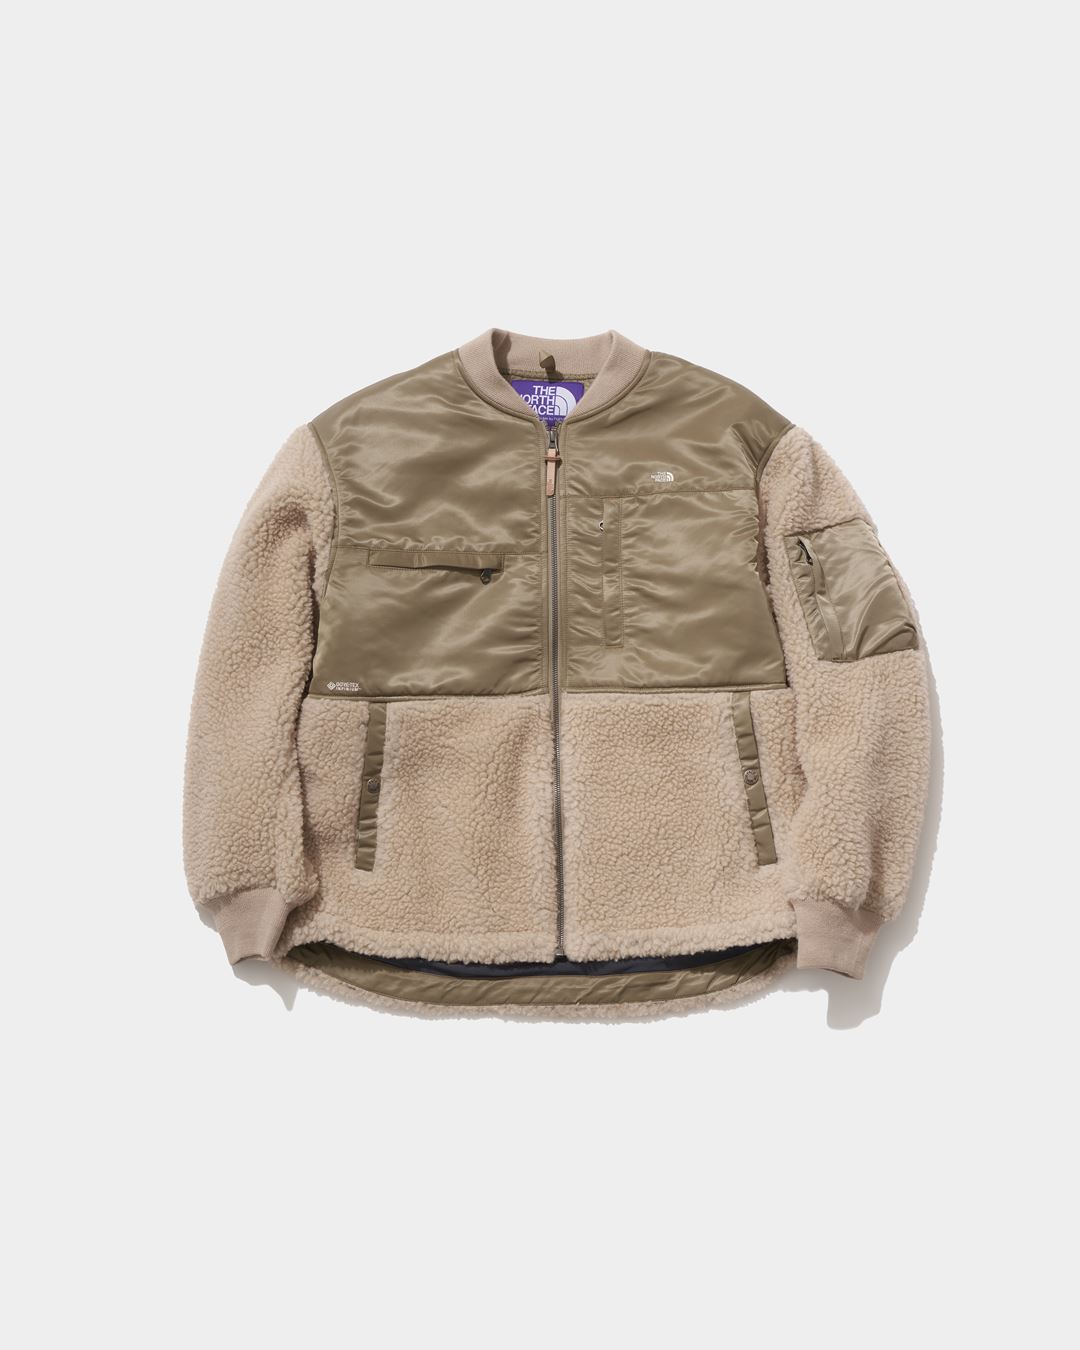 nanamica / THE NORTH FACE PURPLE LABEL / Featured Product vol.16